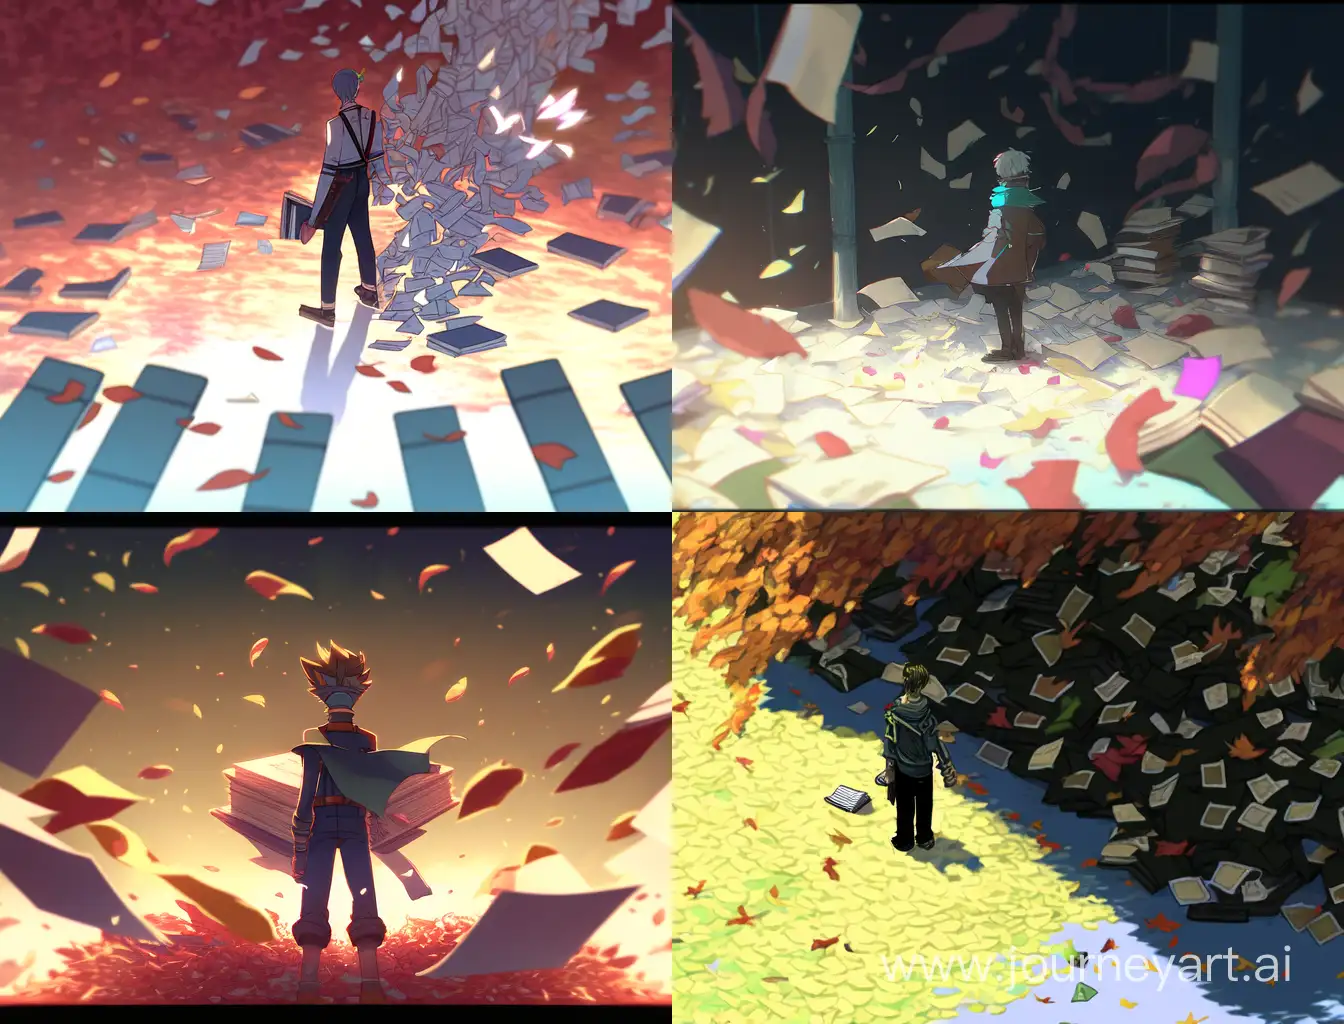 A man stands in front of lots and lots of fallen book leaves.